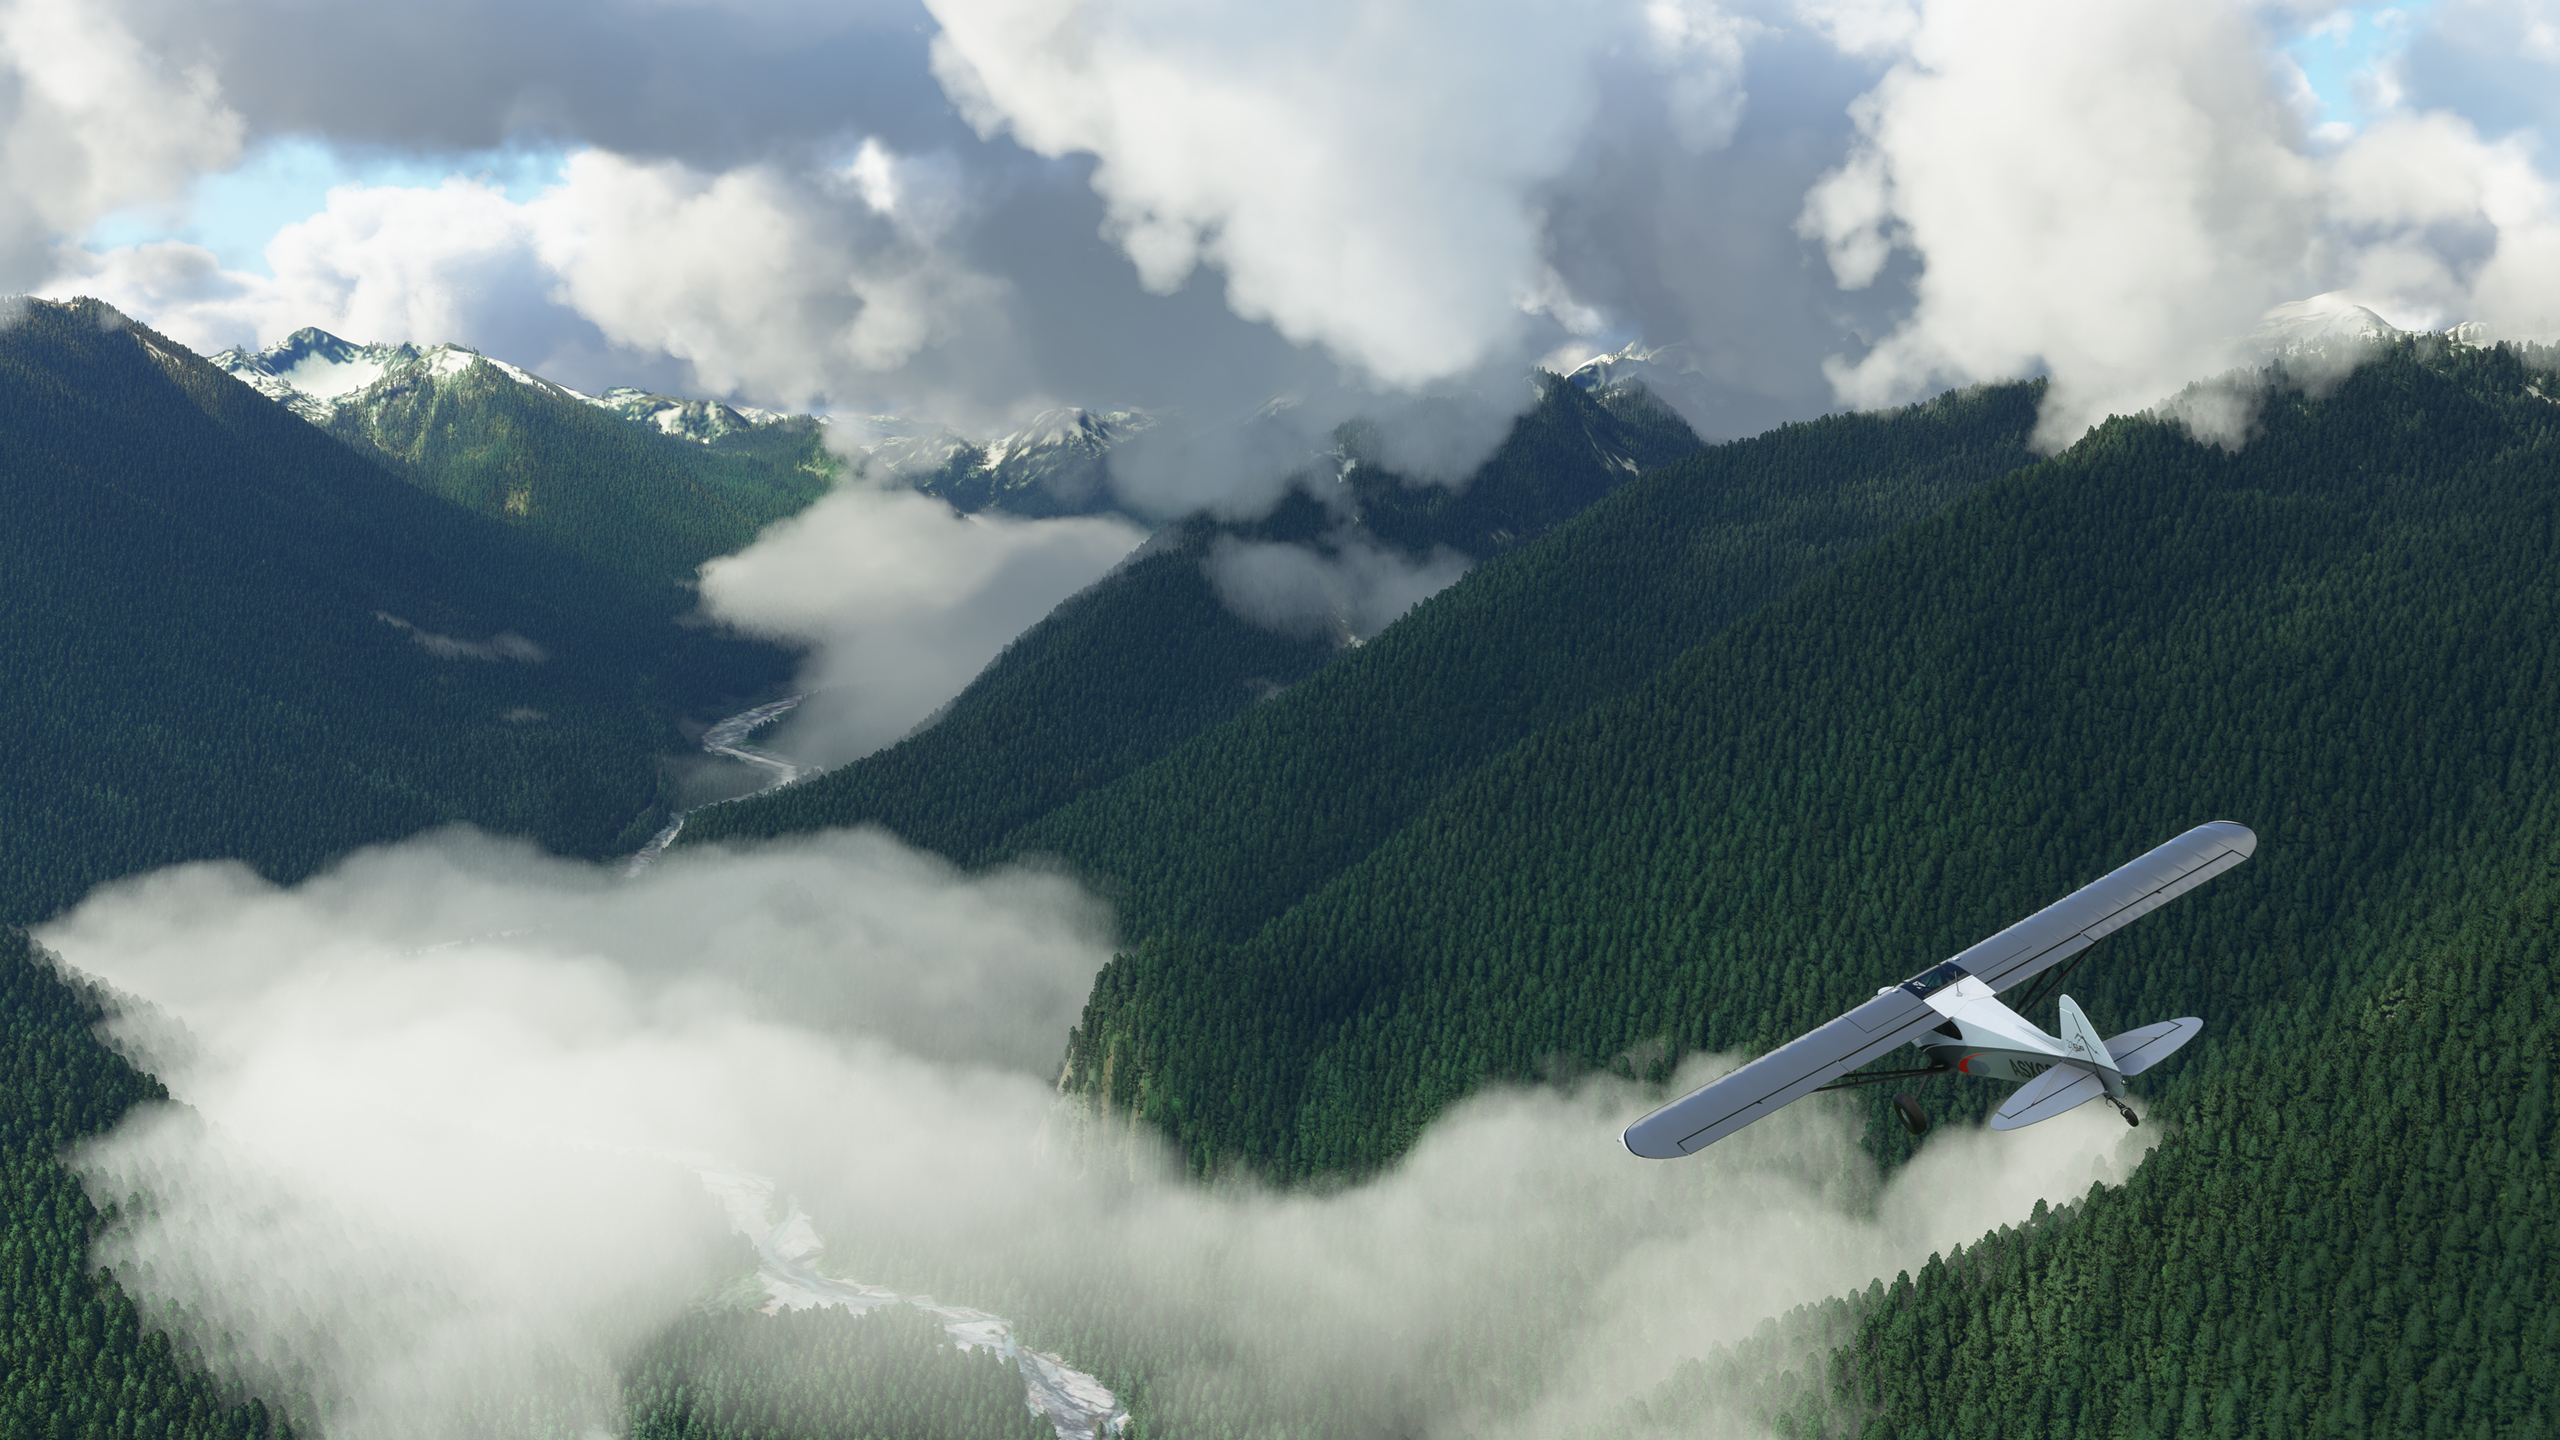 If you wonder how to navigate the Microsoft Flight Simulator with